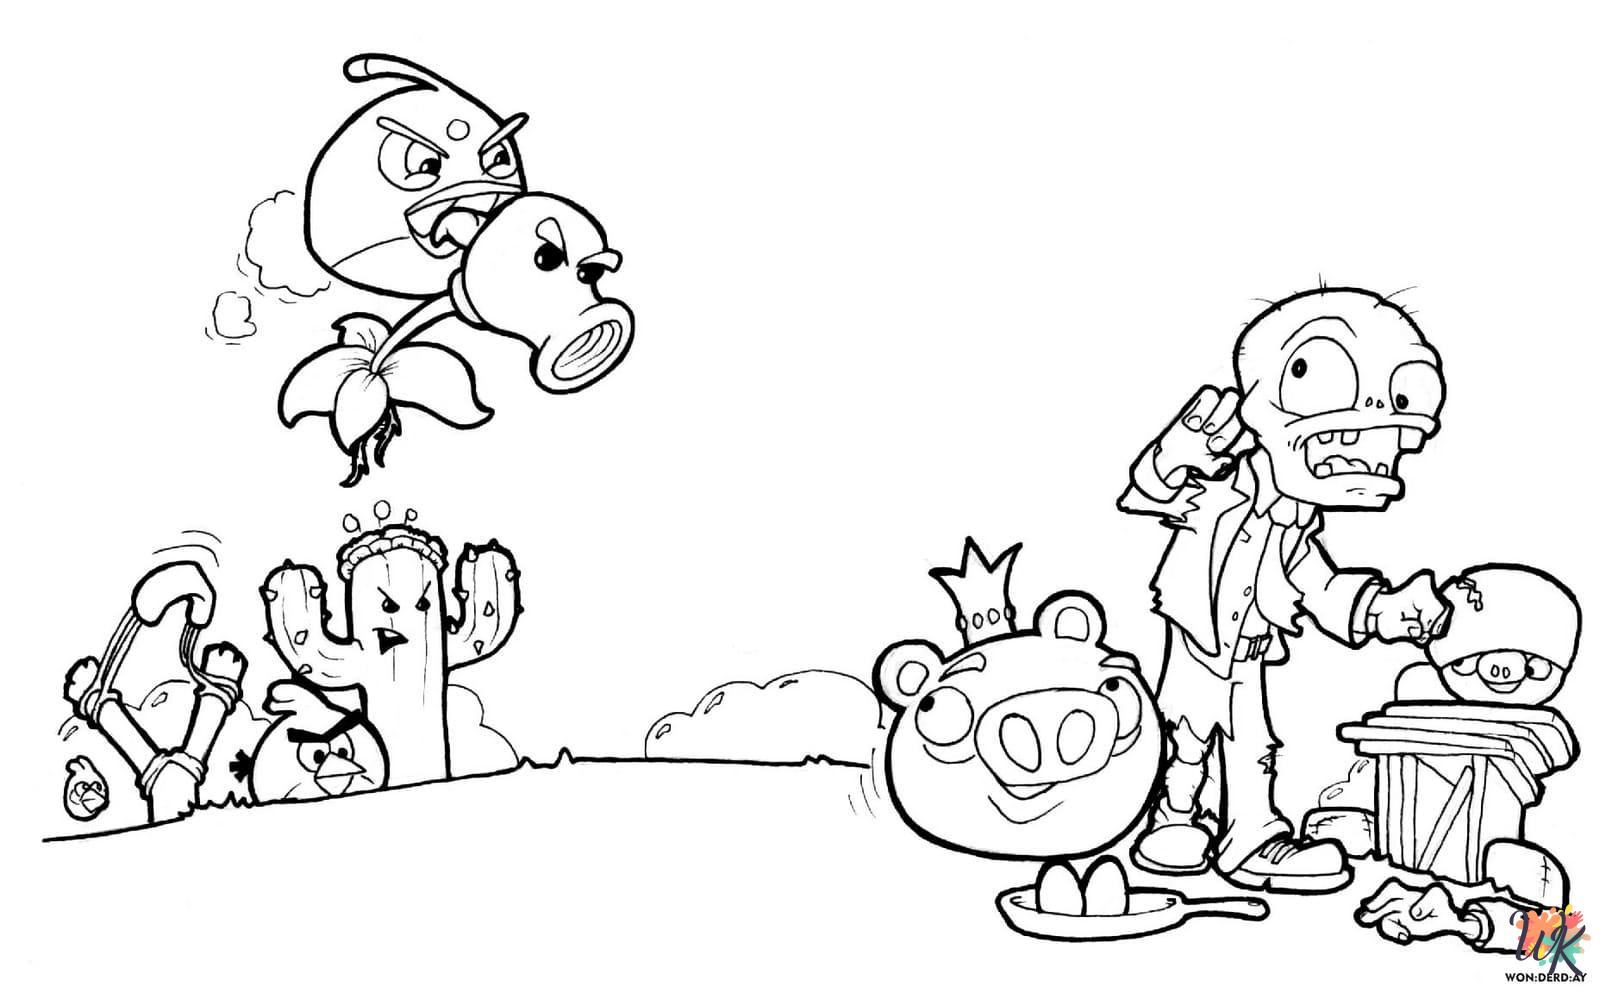 detailed Plants vs. Zombies coloring pages